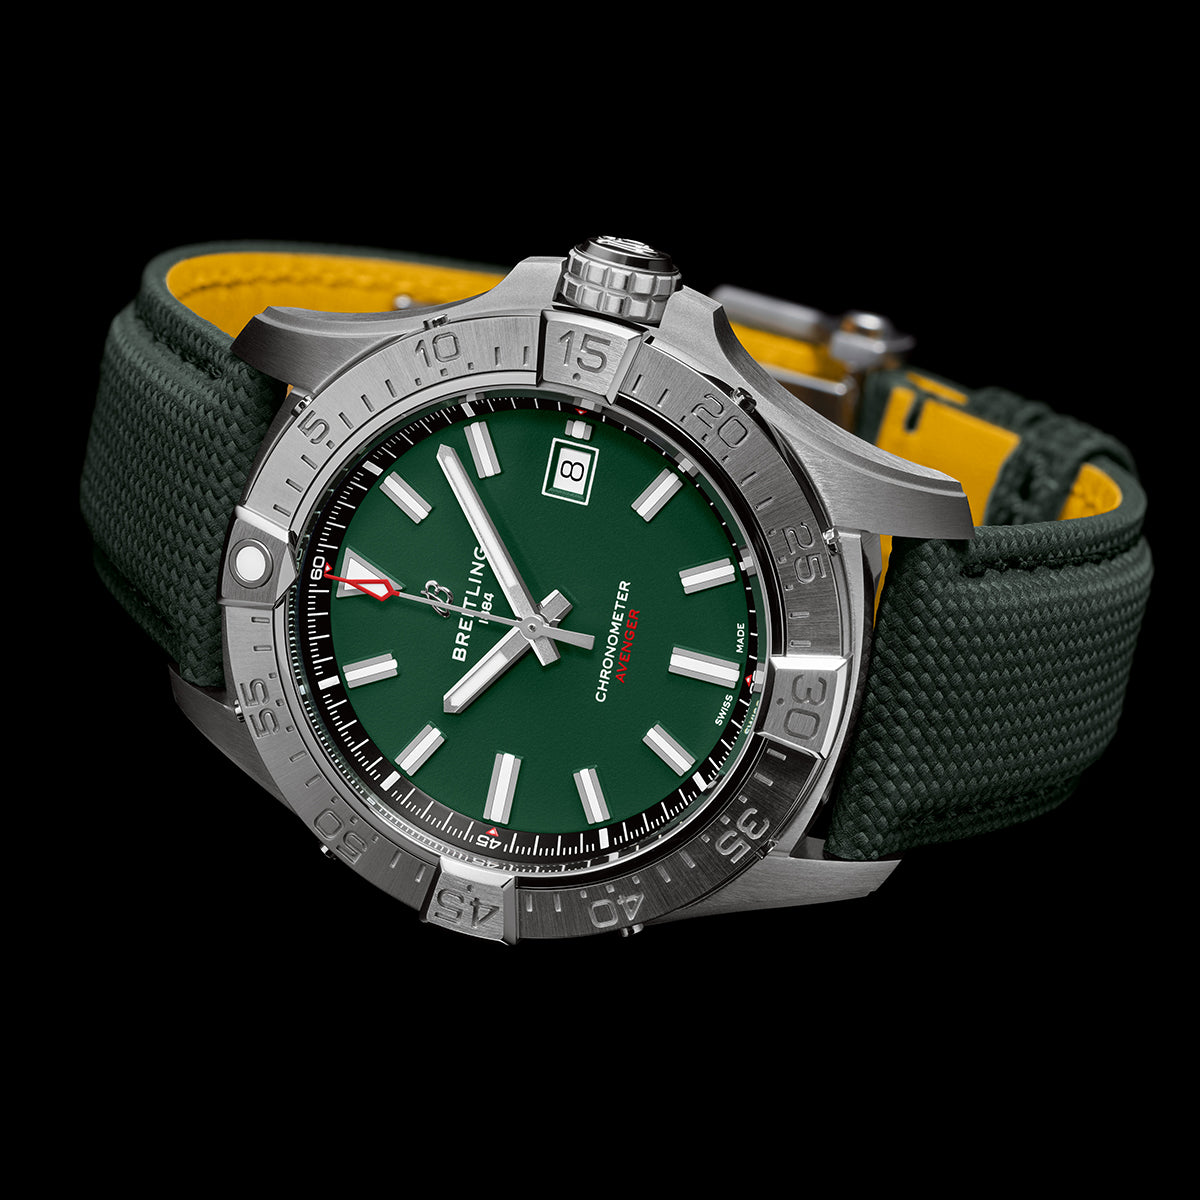 Breitling Avenger Automatic 42